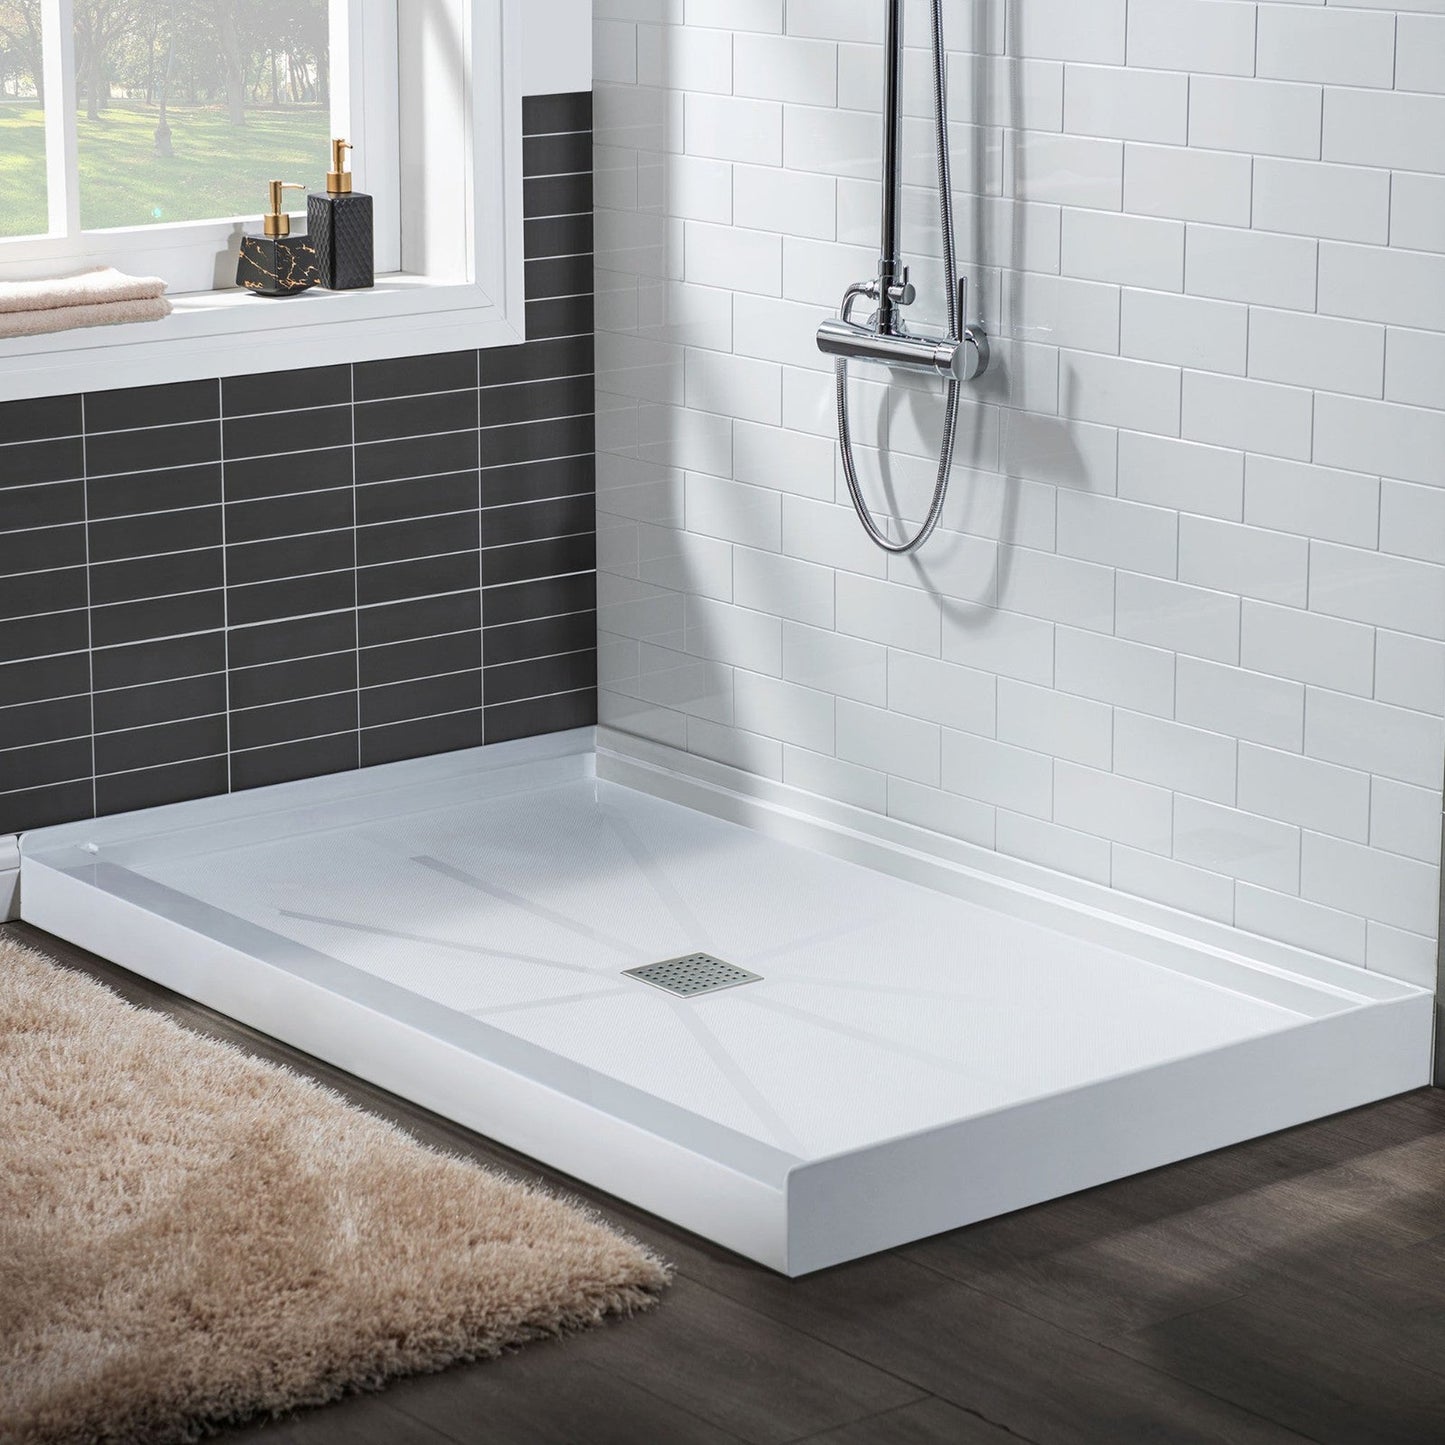 WoodBridge 60" x 32" White Solid Surface Shower Base Center Drain Location With Brushed Nickel Trench Drain Cover